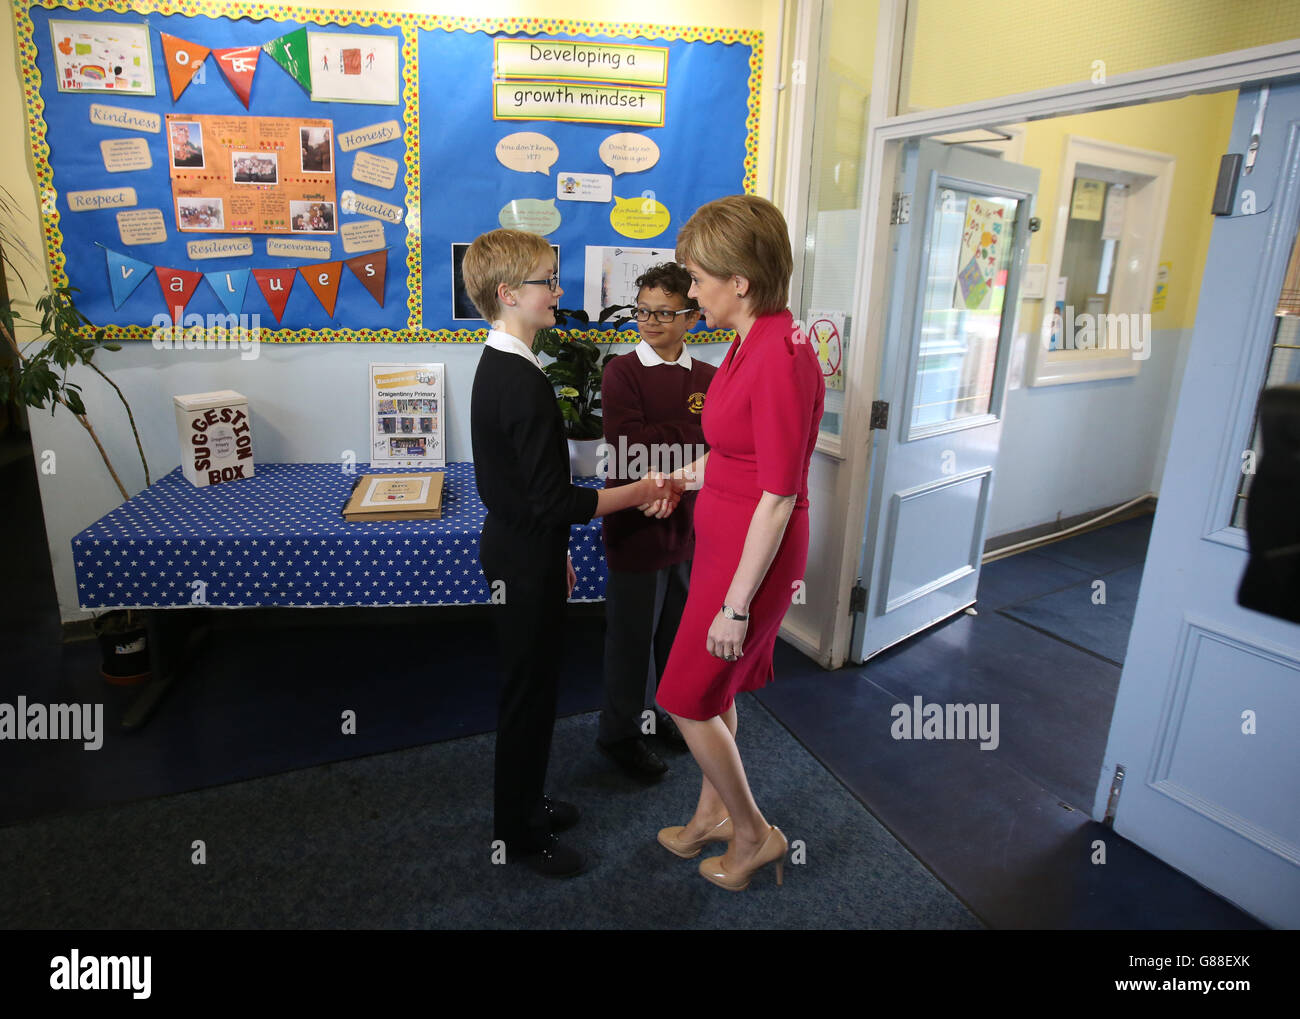 First Minister Nicola Sturgeon meets pupils Katie Boys and Rowan Nimmo (centre) at Craigentinny Primary School in Edinburgh, as she prepares to set out how she plans to use new powers that are coming to Holyrood both 'creatively and ambitiously'. Stock Photo